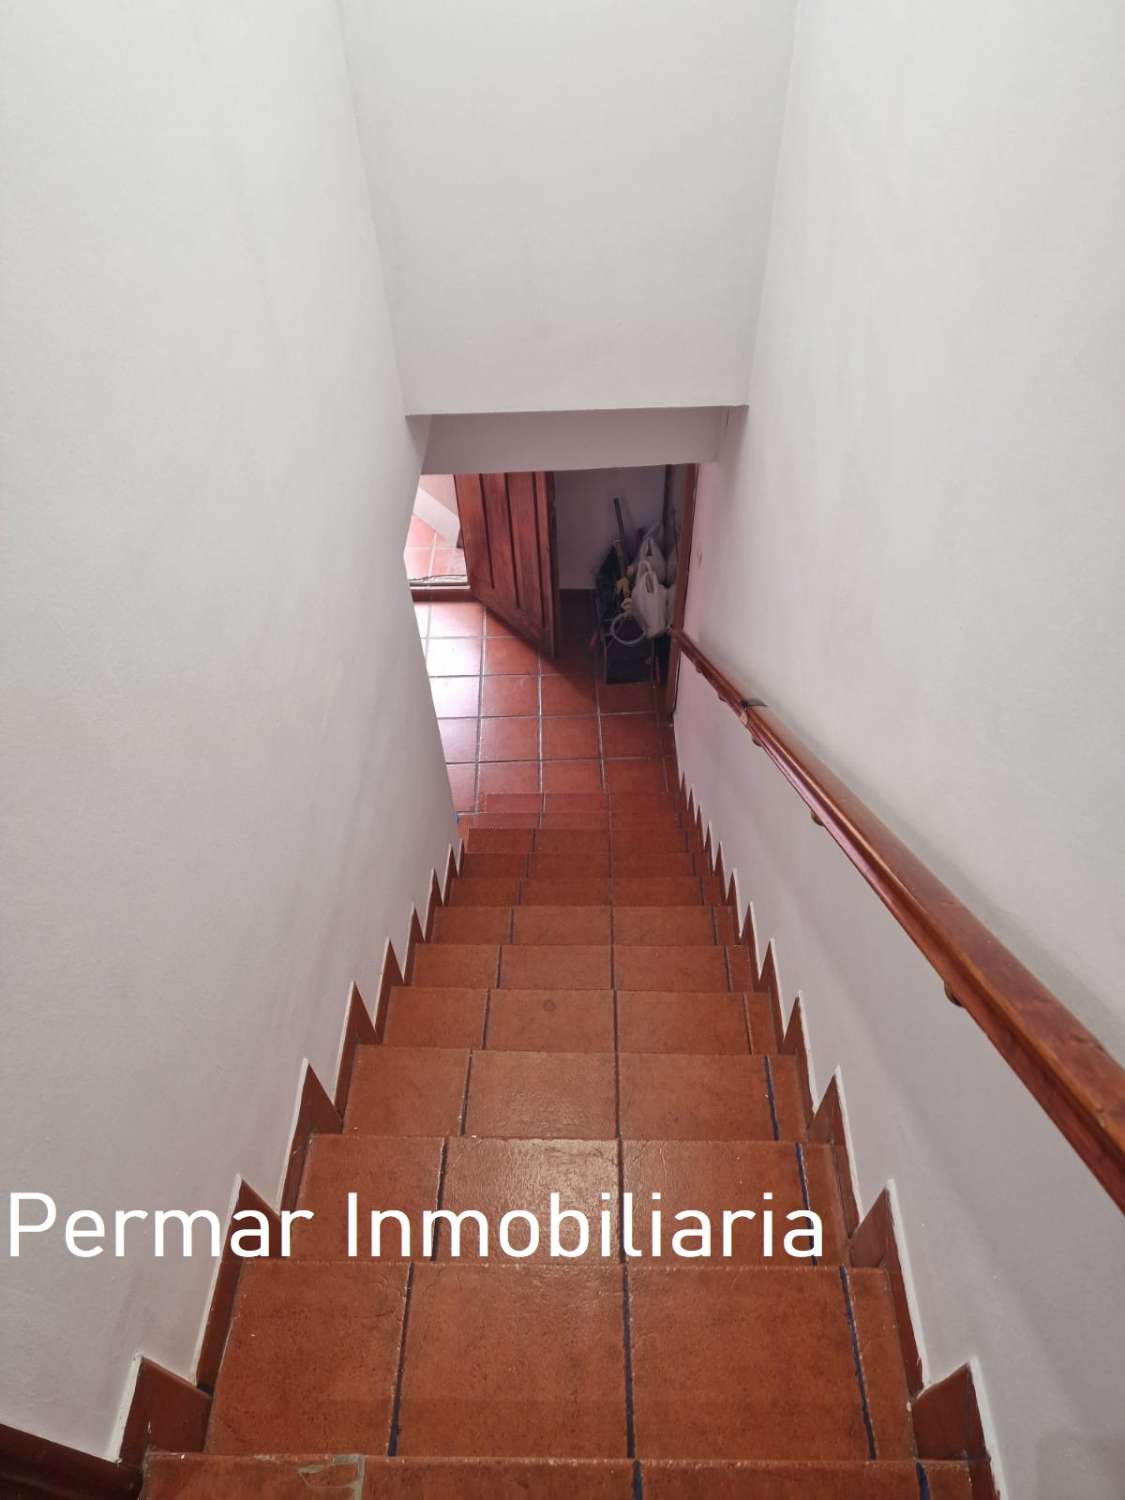 House for sale in Otañes